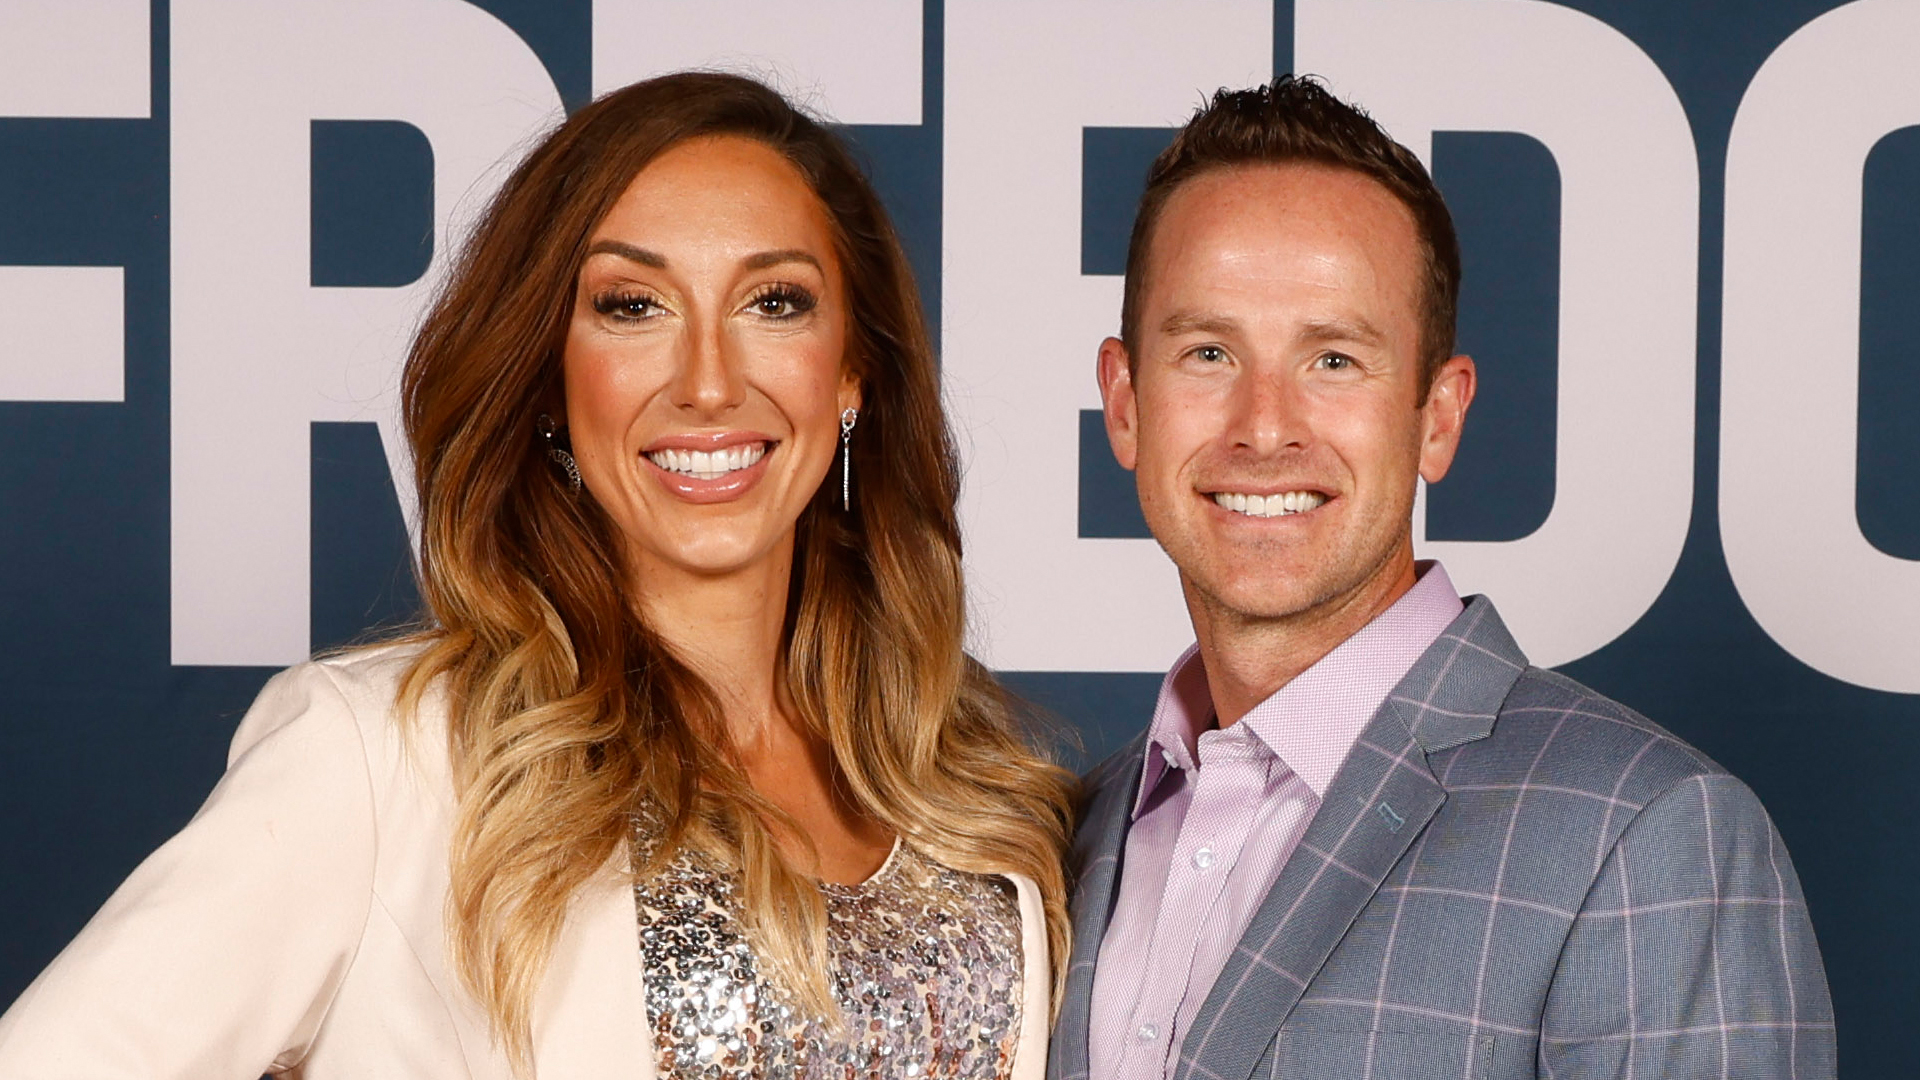 Influencer & mom of 8 Jordan Page is ‘discontinuing her marriage’ with husband Bubba leaving fans in ‘shock’ [Video]